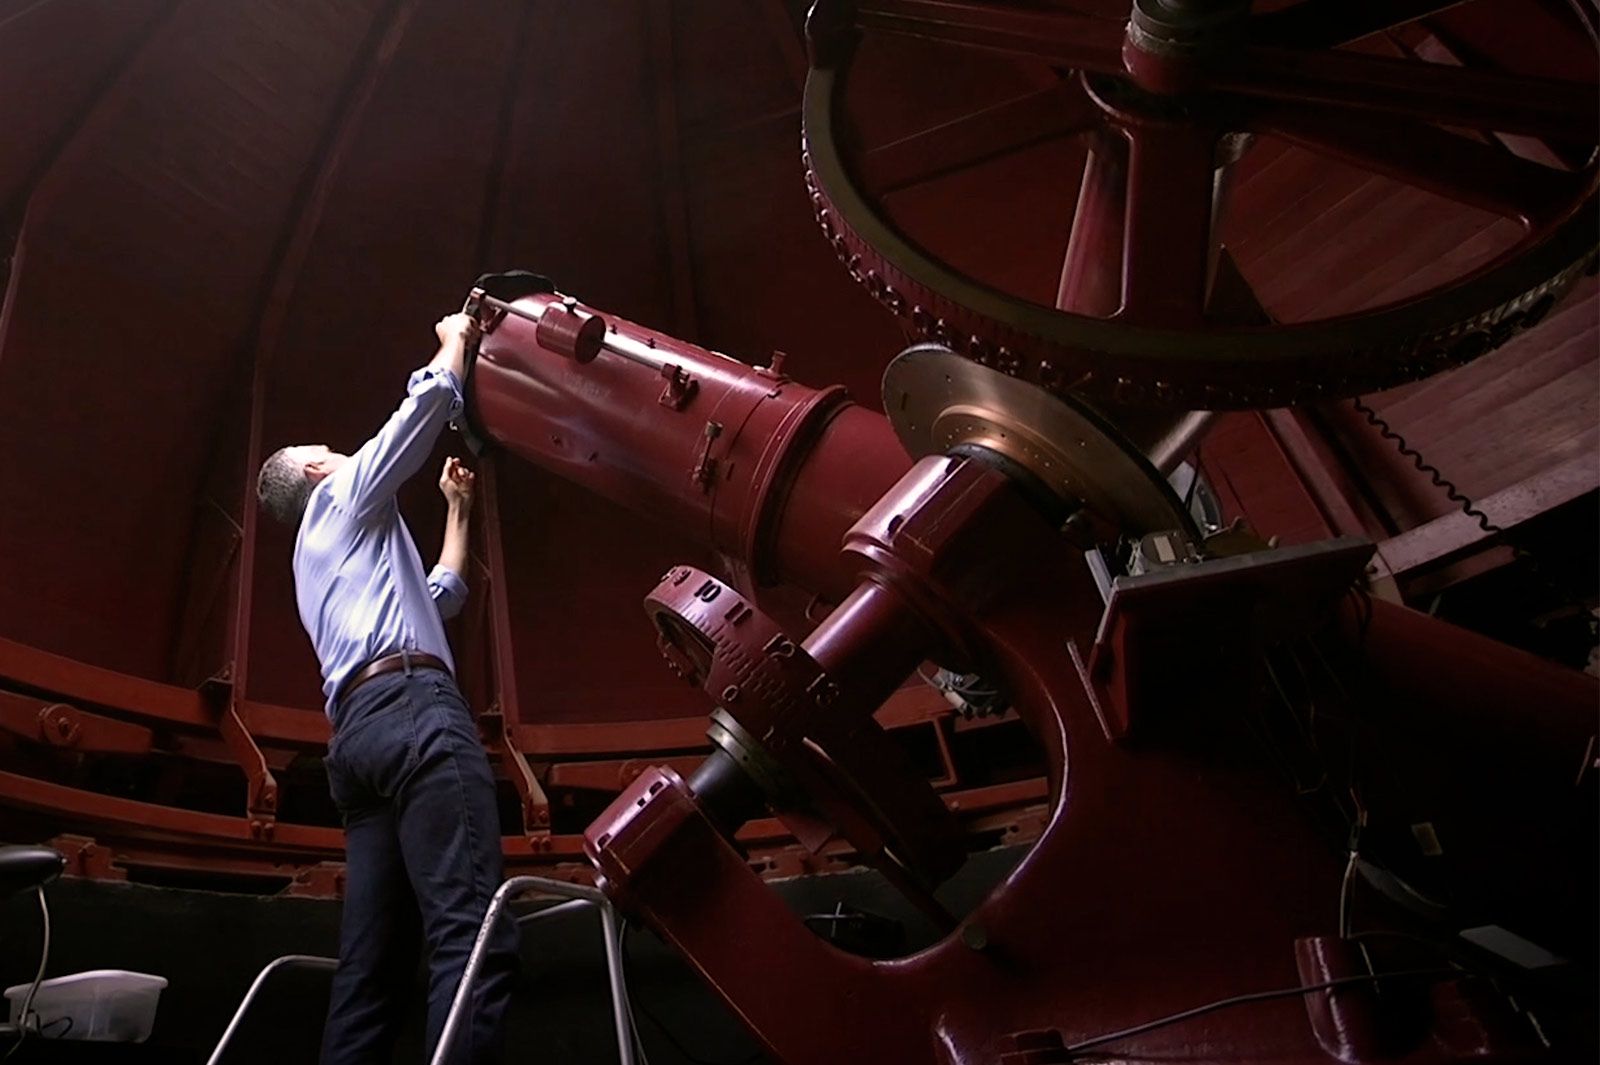 The back of someone in the domed room of the Melton Observatory reaching up to adjust the telescope.